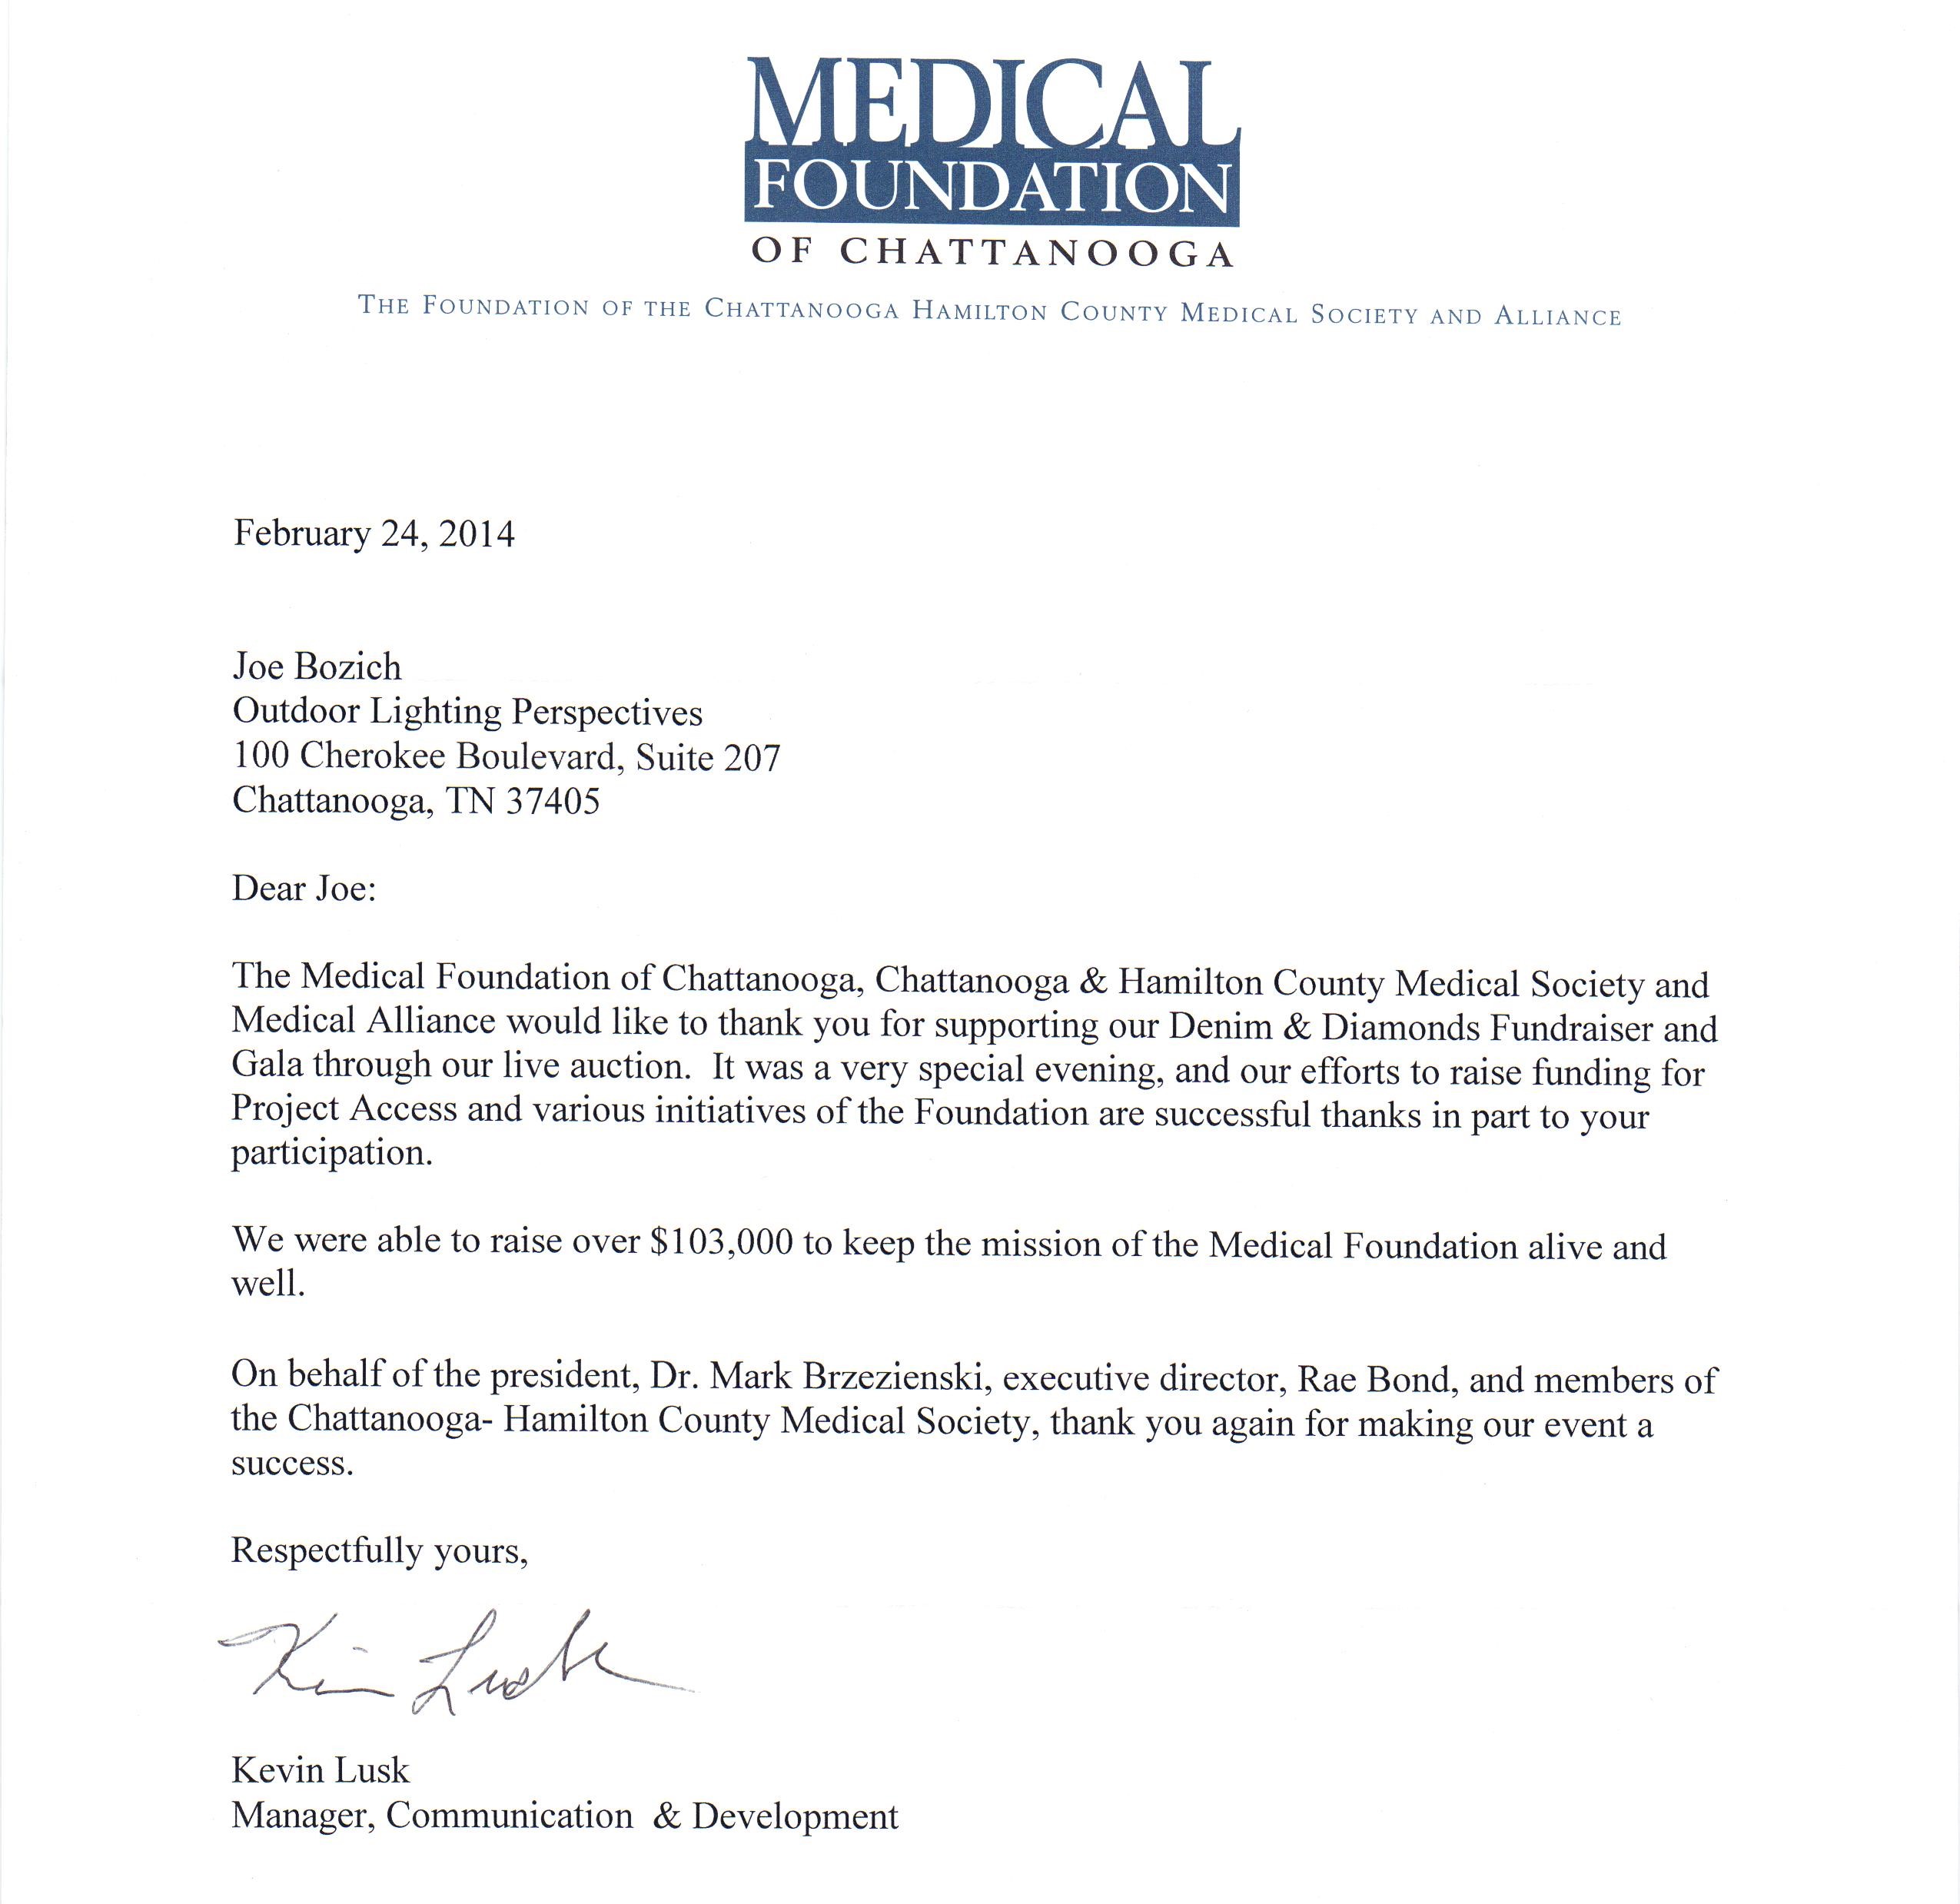 Medical Foundation of Chattanooga Contribution Letter